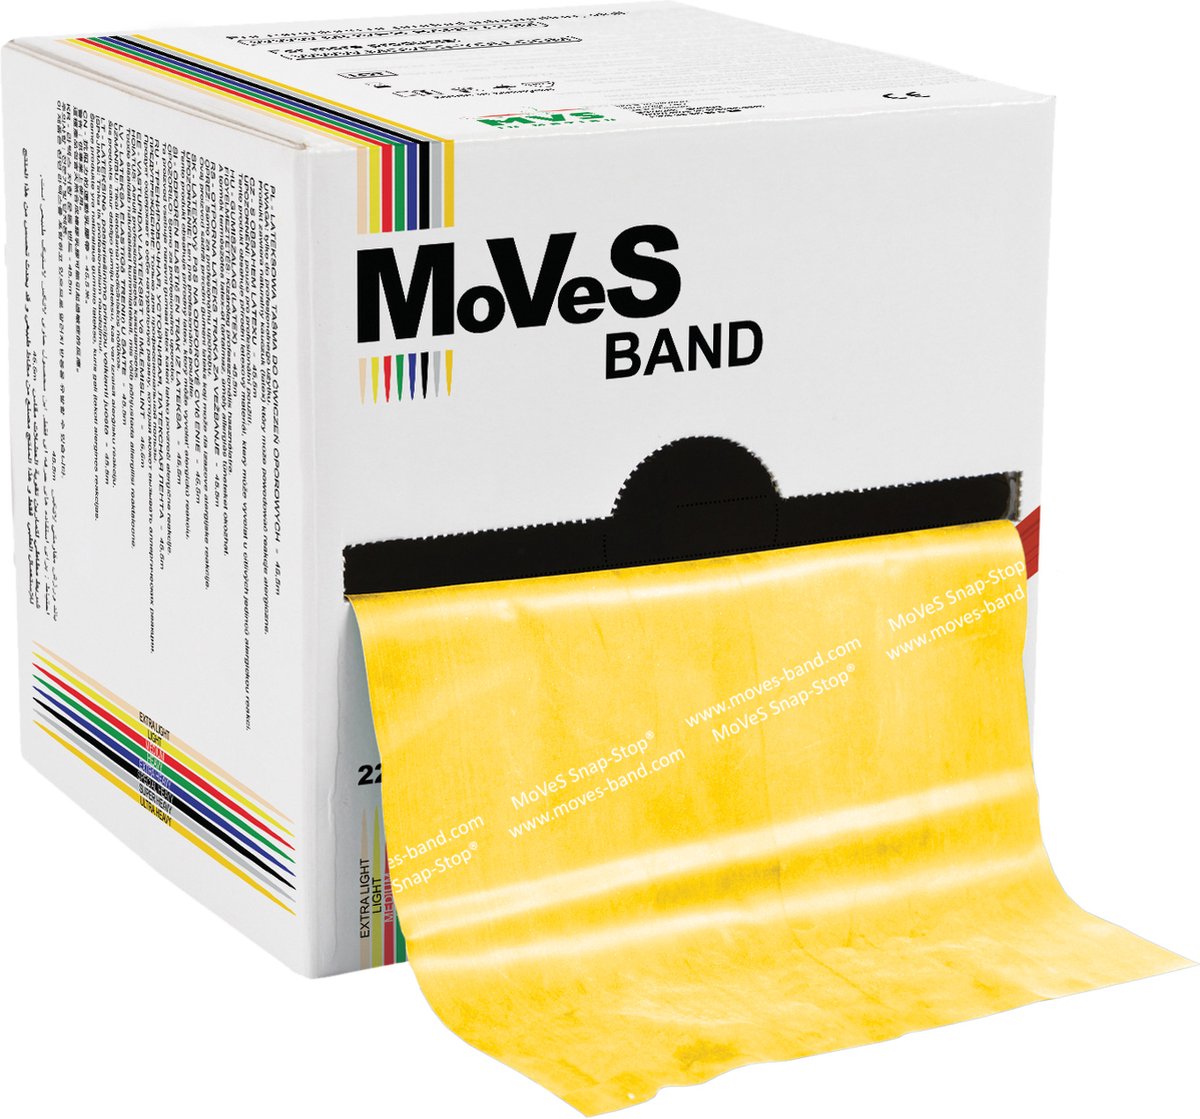 MoVeS - Band 22,5m - Light - Yellow